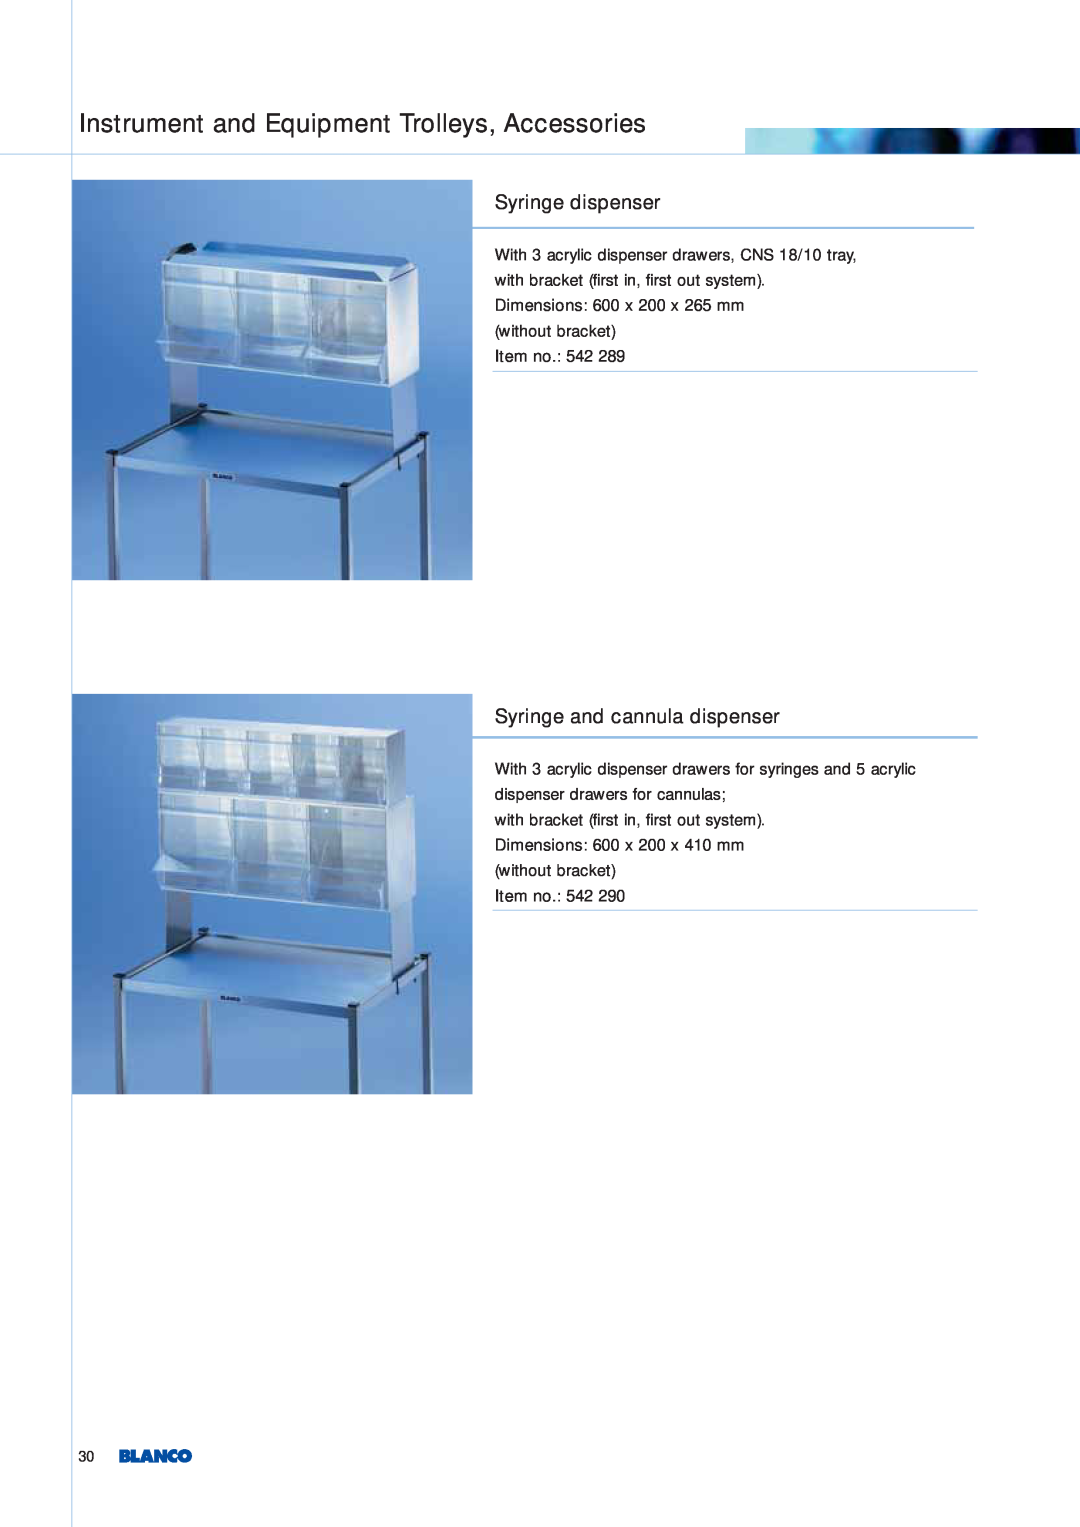 Blanco Tbingen manual Syringe dispenser, Syringe and cannula dispenser, Instrument and Equipment Trolleys, Accessories 